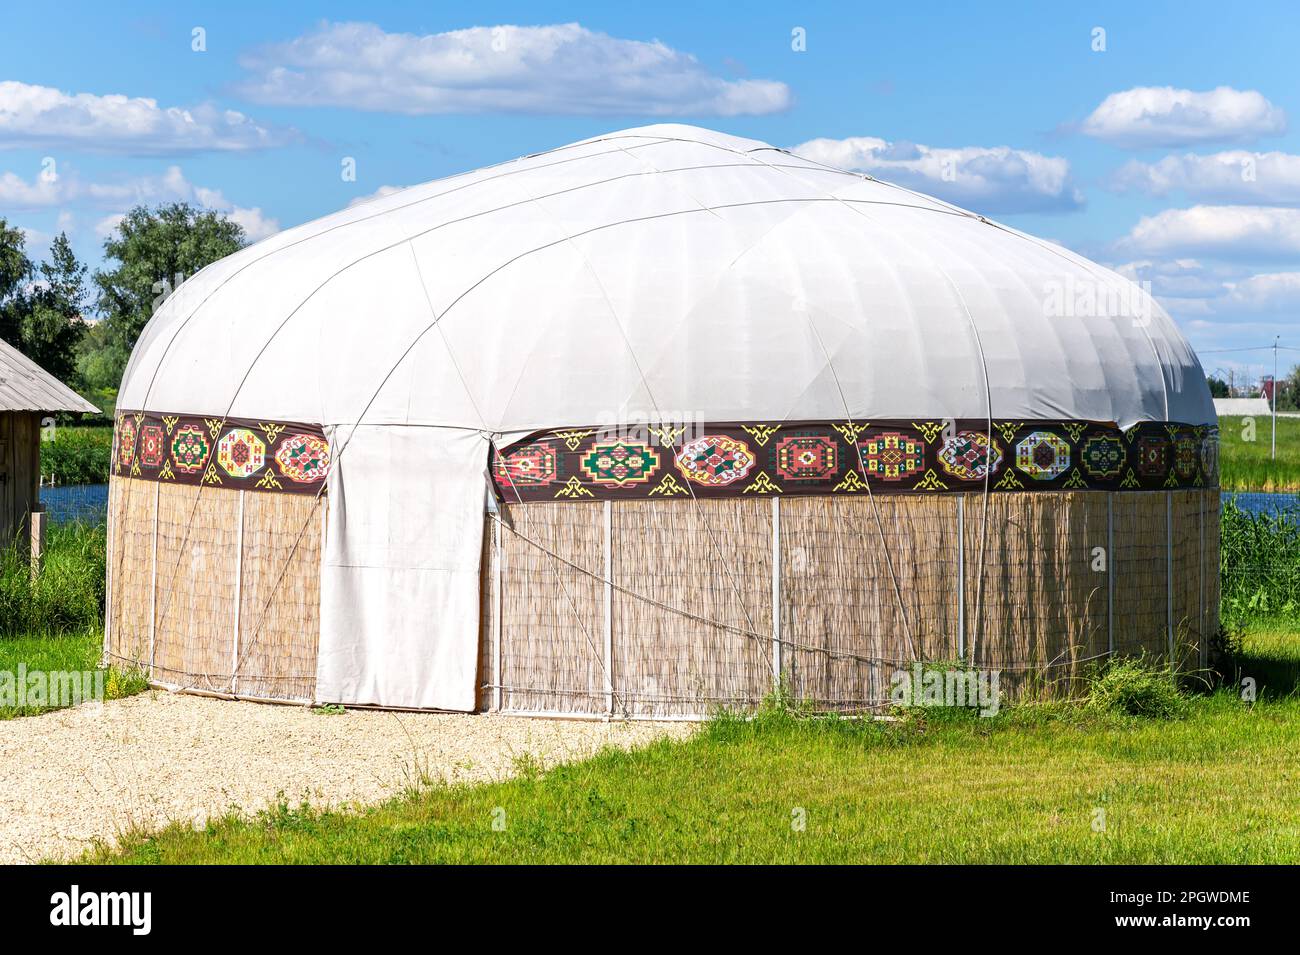 Samara, Russia - September 25, 2021: Yurt - national ancient house of the nomad peoples of Asian countries. Traditional Turkmen yurt in summer. Dwelli Stock Photo